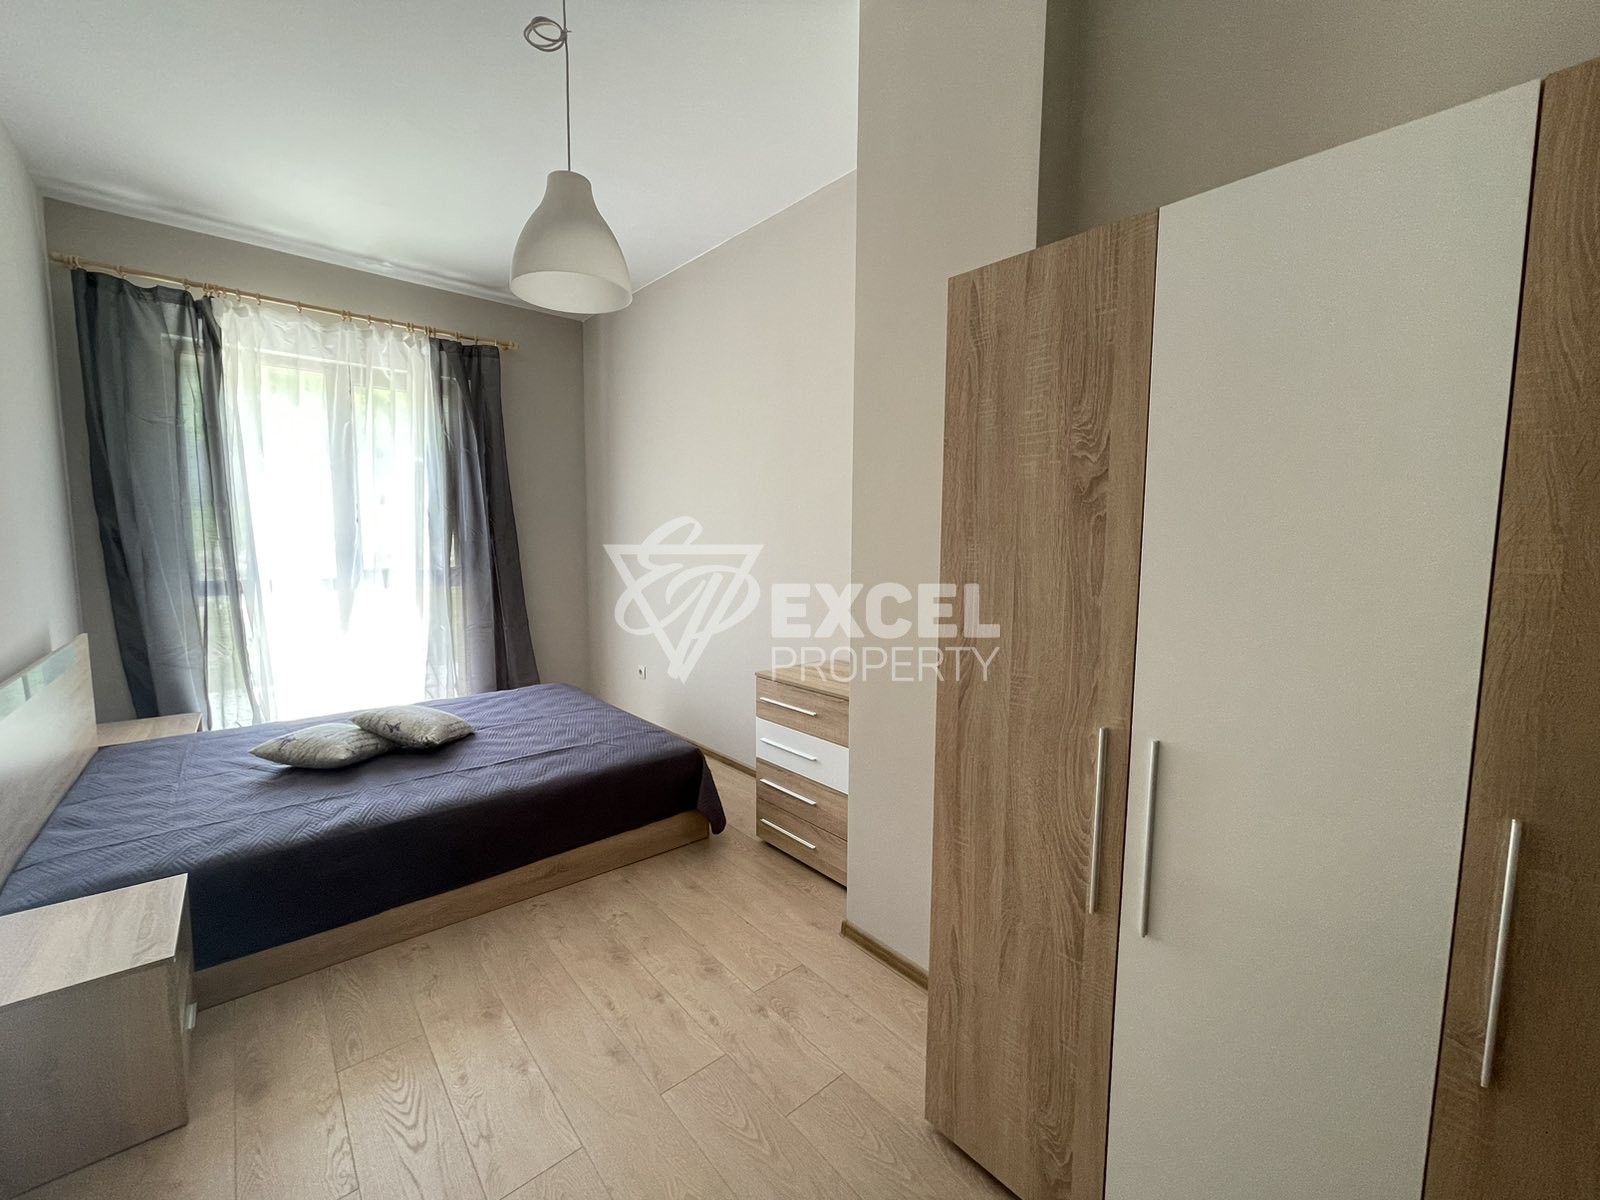 Spacious multi-room furnished apartment for sale in Bansko